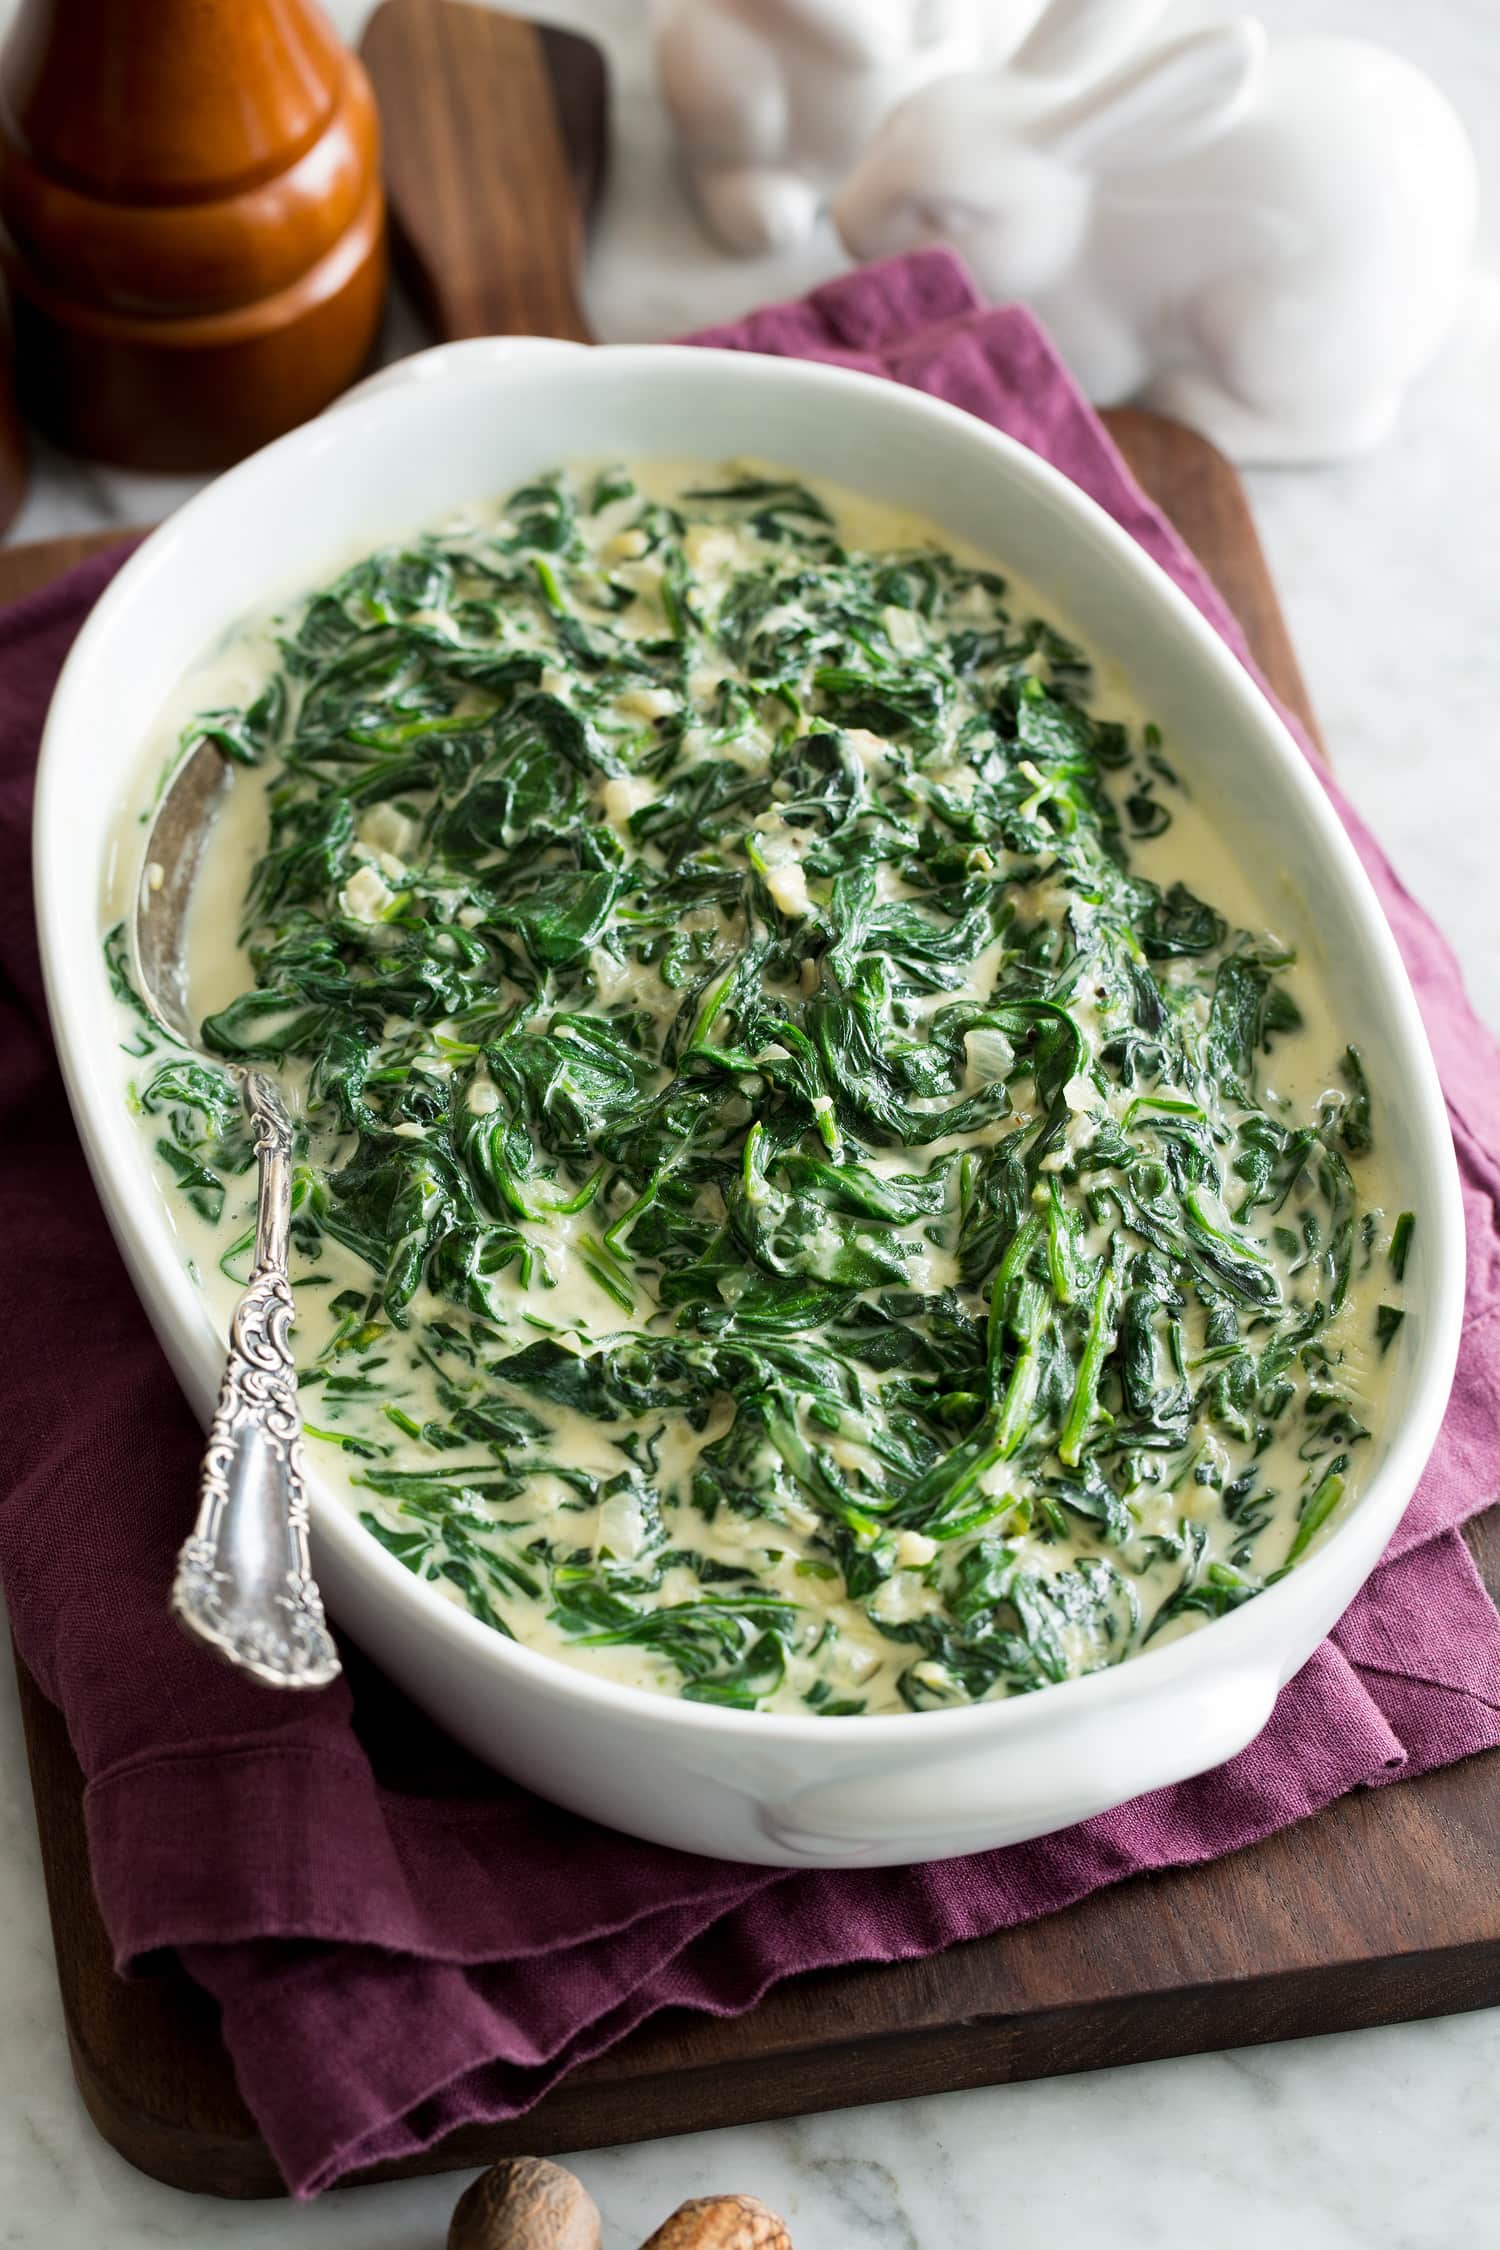 Homemade creamed spinach in a white oval serving dish.